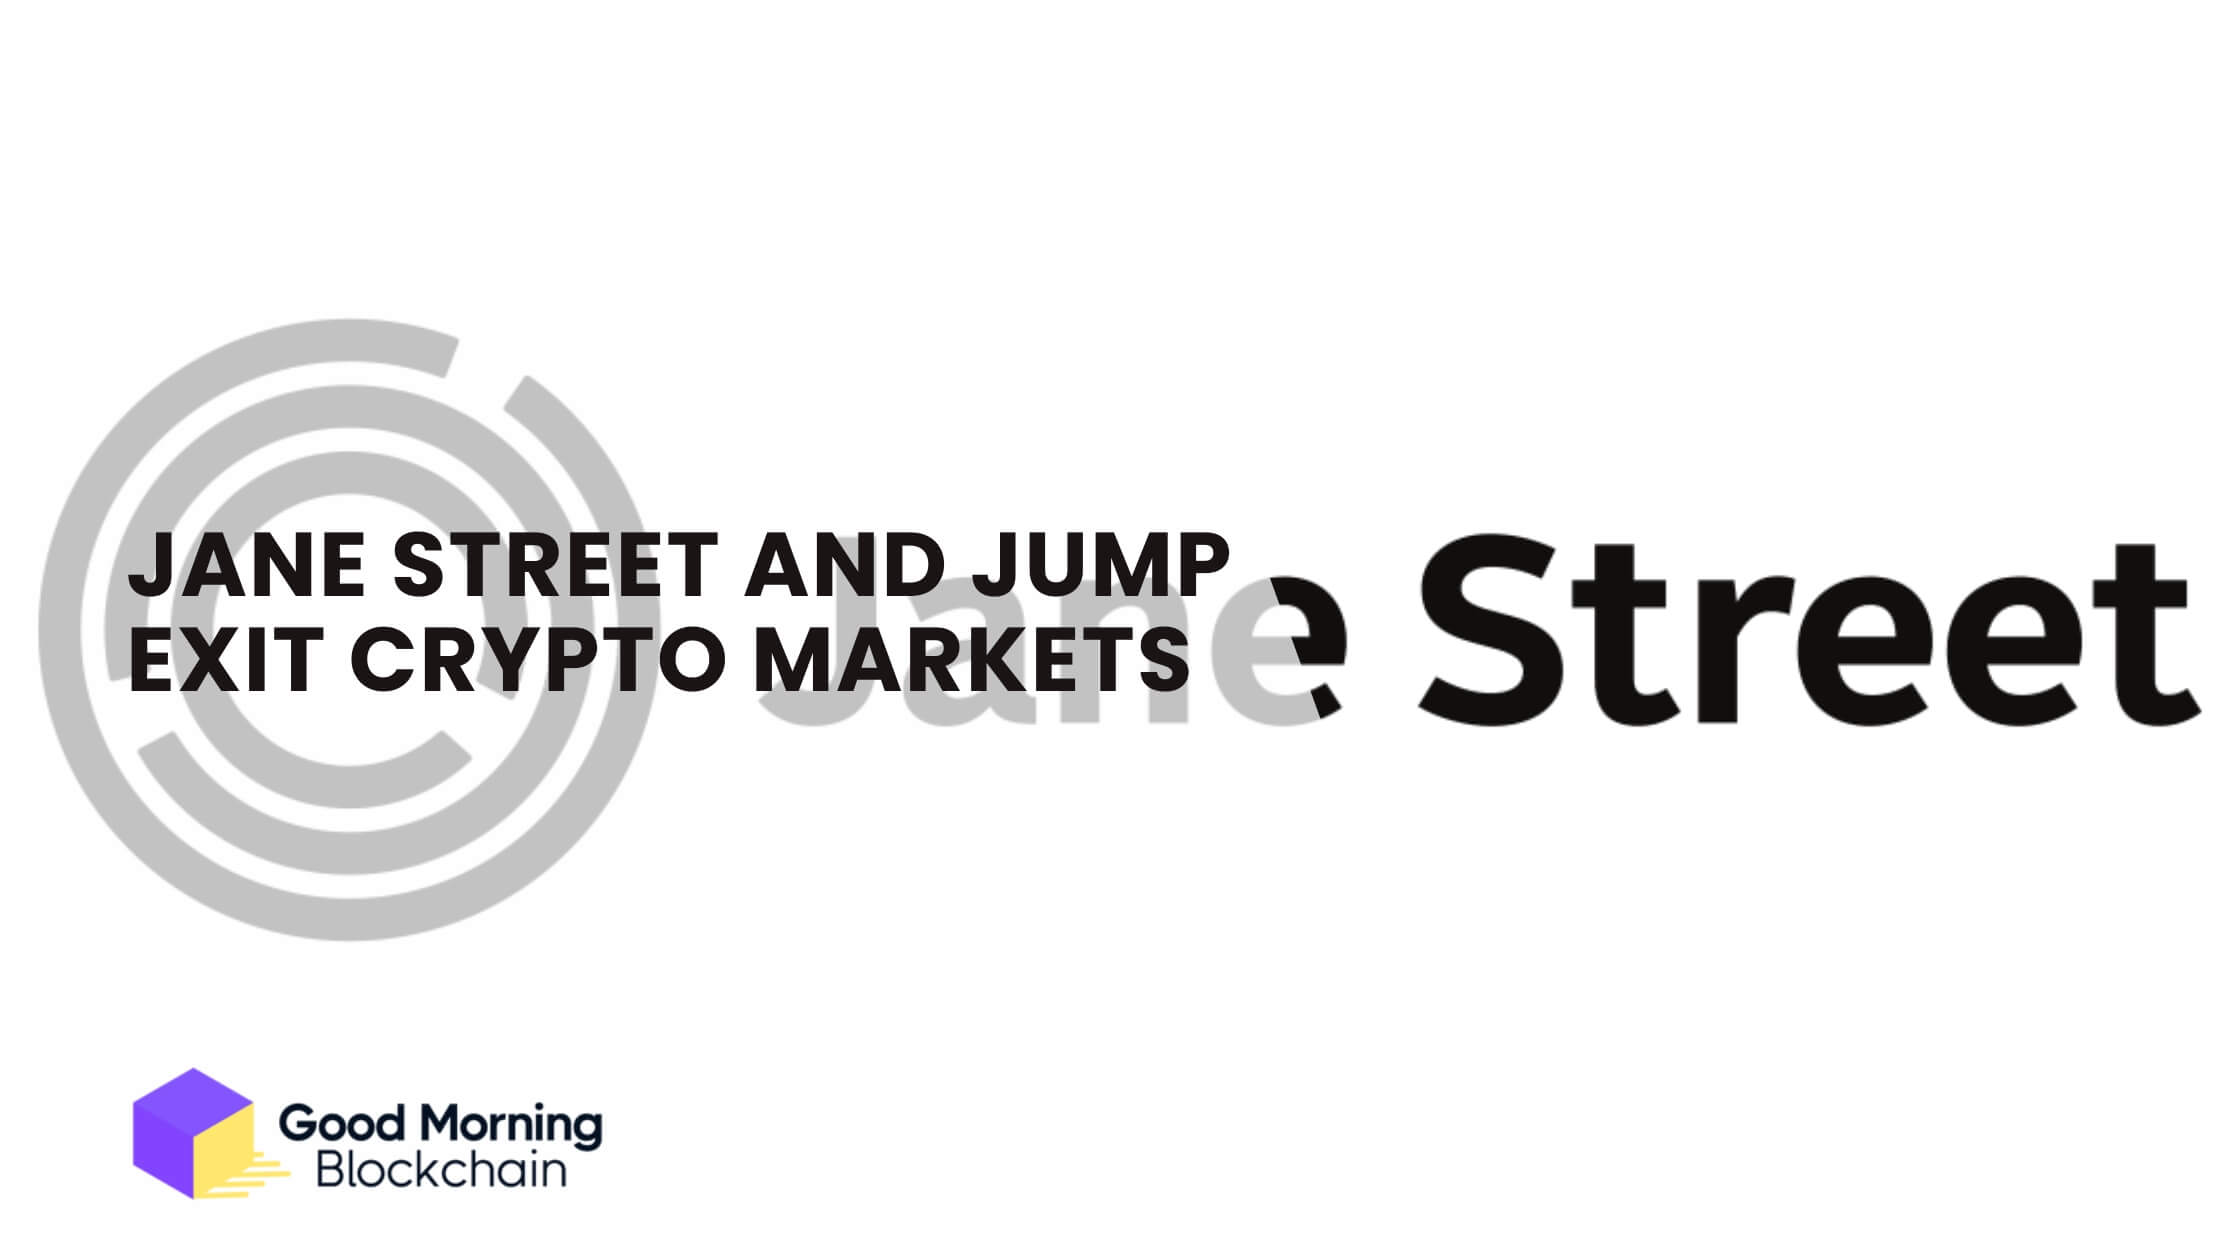 Jane Street and Jump Exit Crypto Markets, Raising Concerns Over Bitcoin